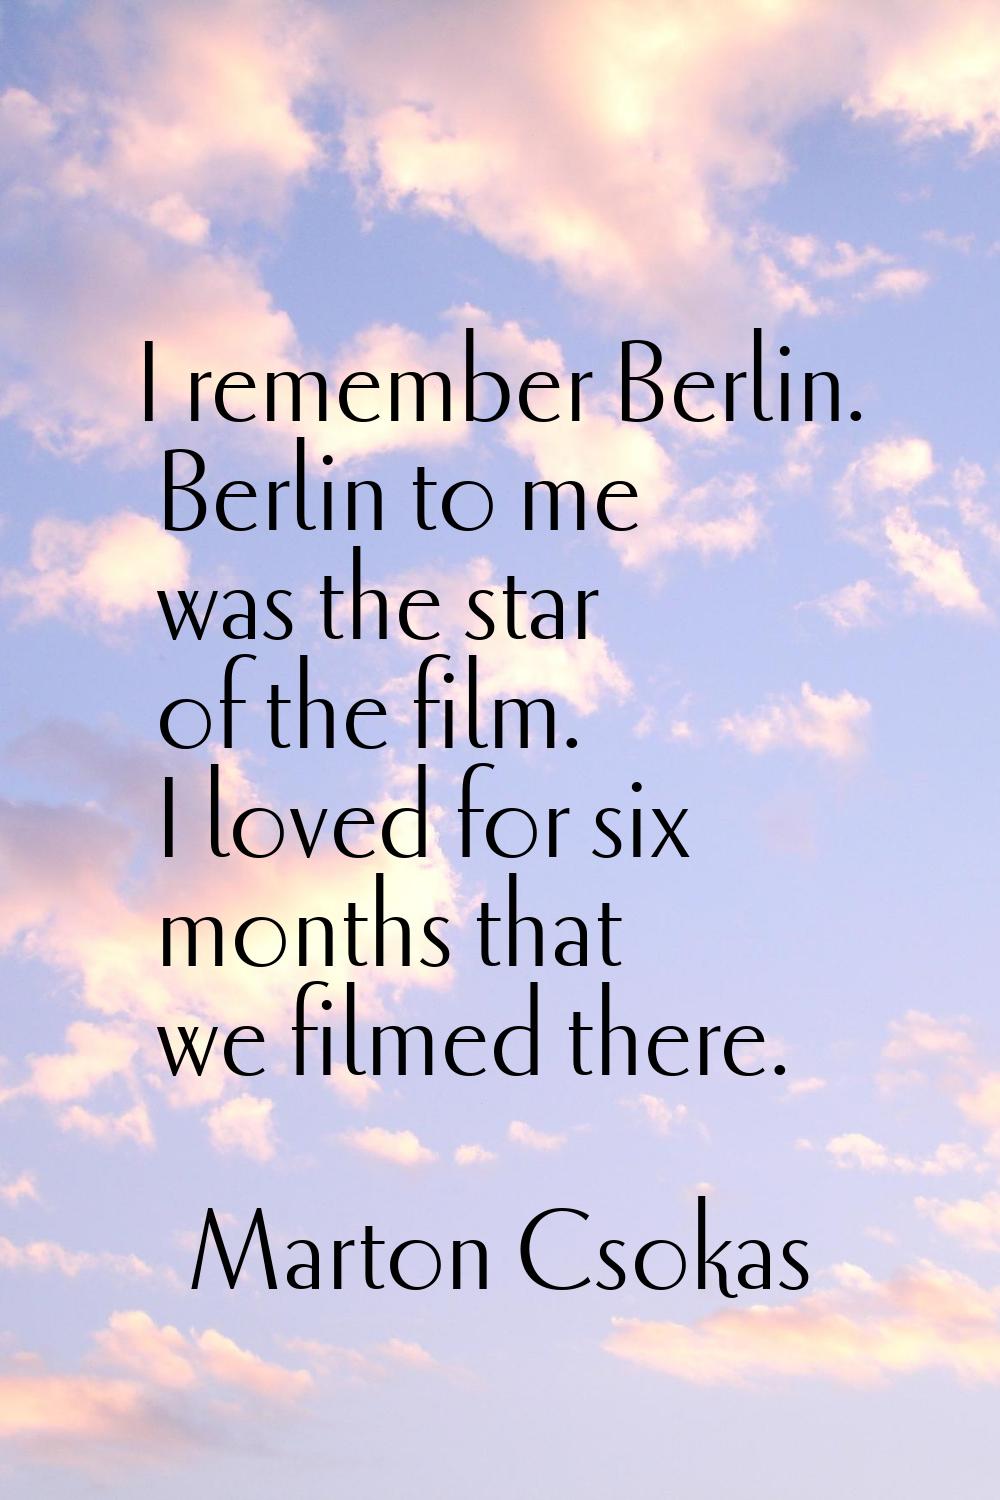 I remember Berlin. Berlin to me was the star of the film. I loved for six months that we filmed the